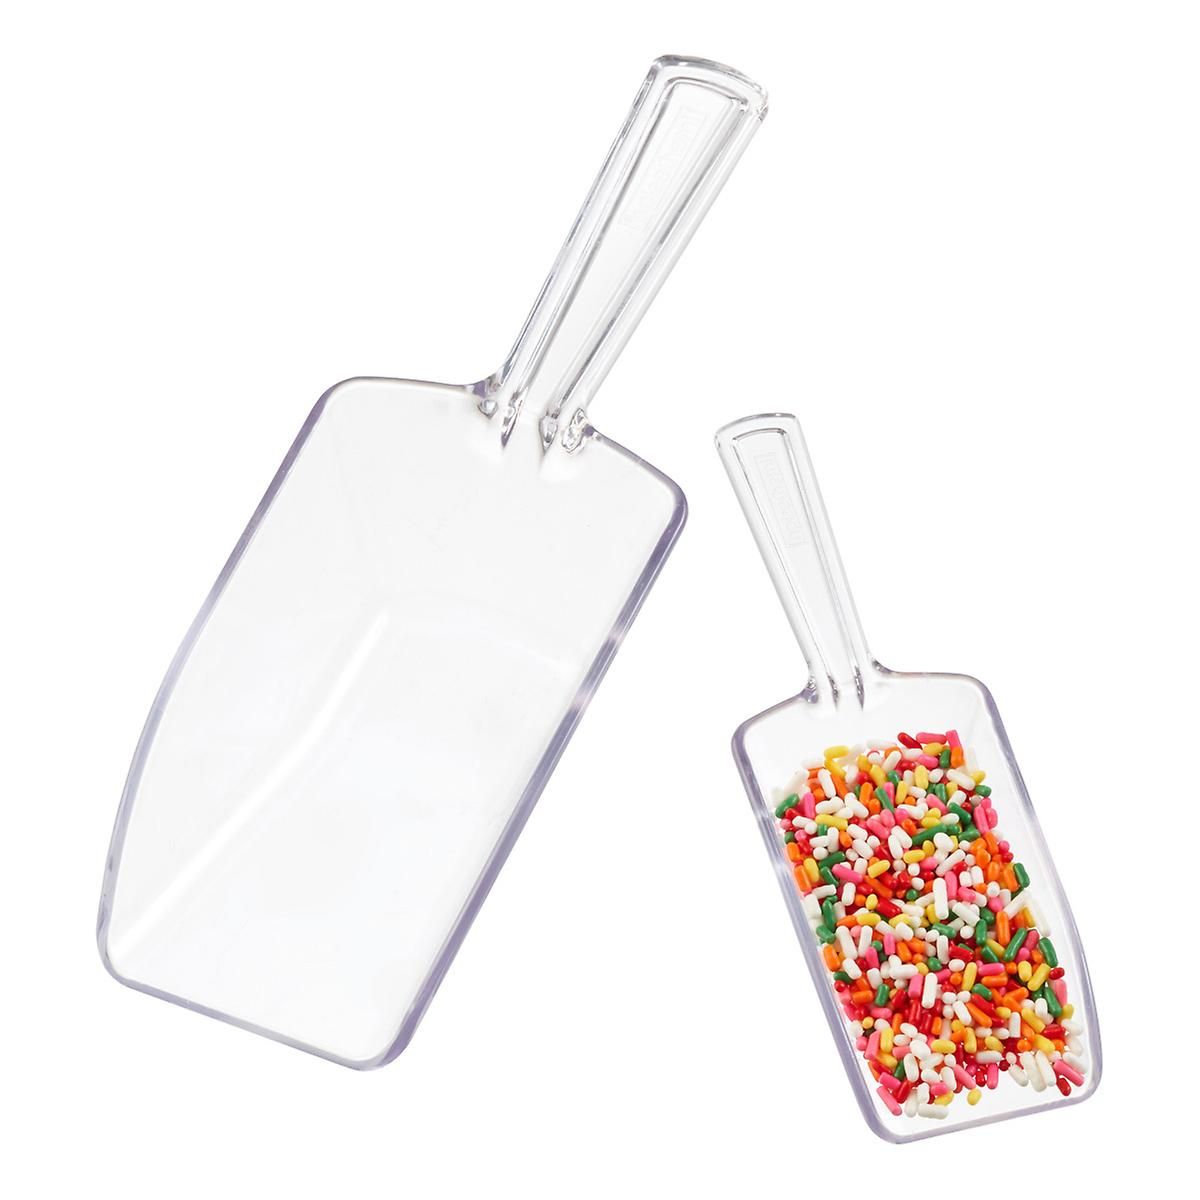 iDesign Clear Plastic Scoops | The Container Store